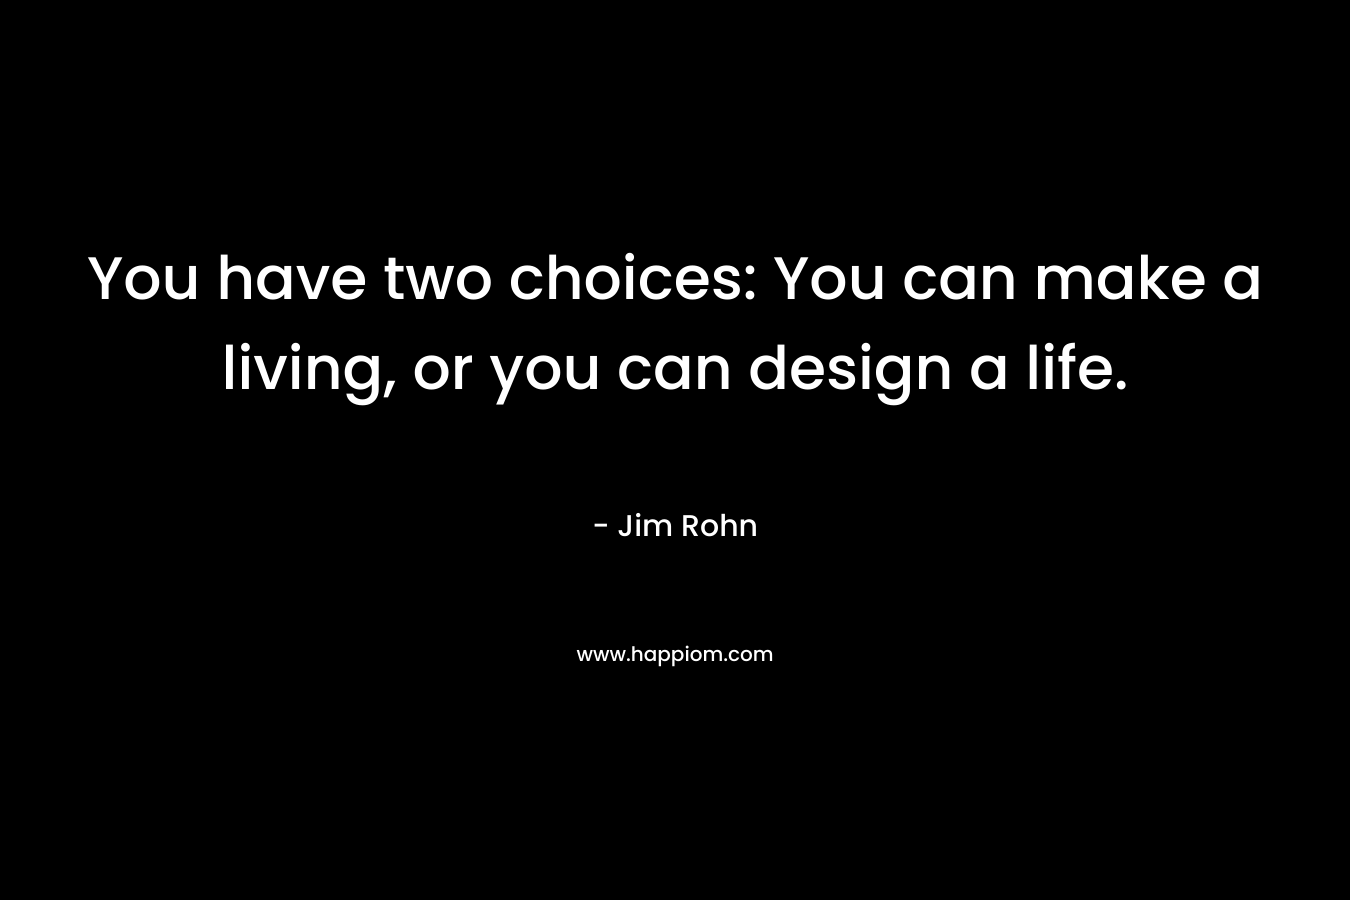 You have two choices: You can make a living, or you can design a life. – Jim Rohn